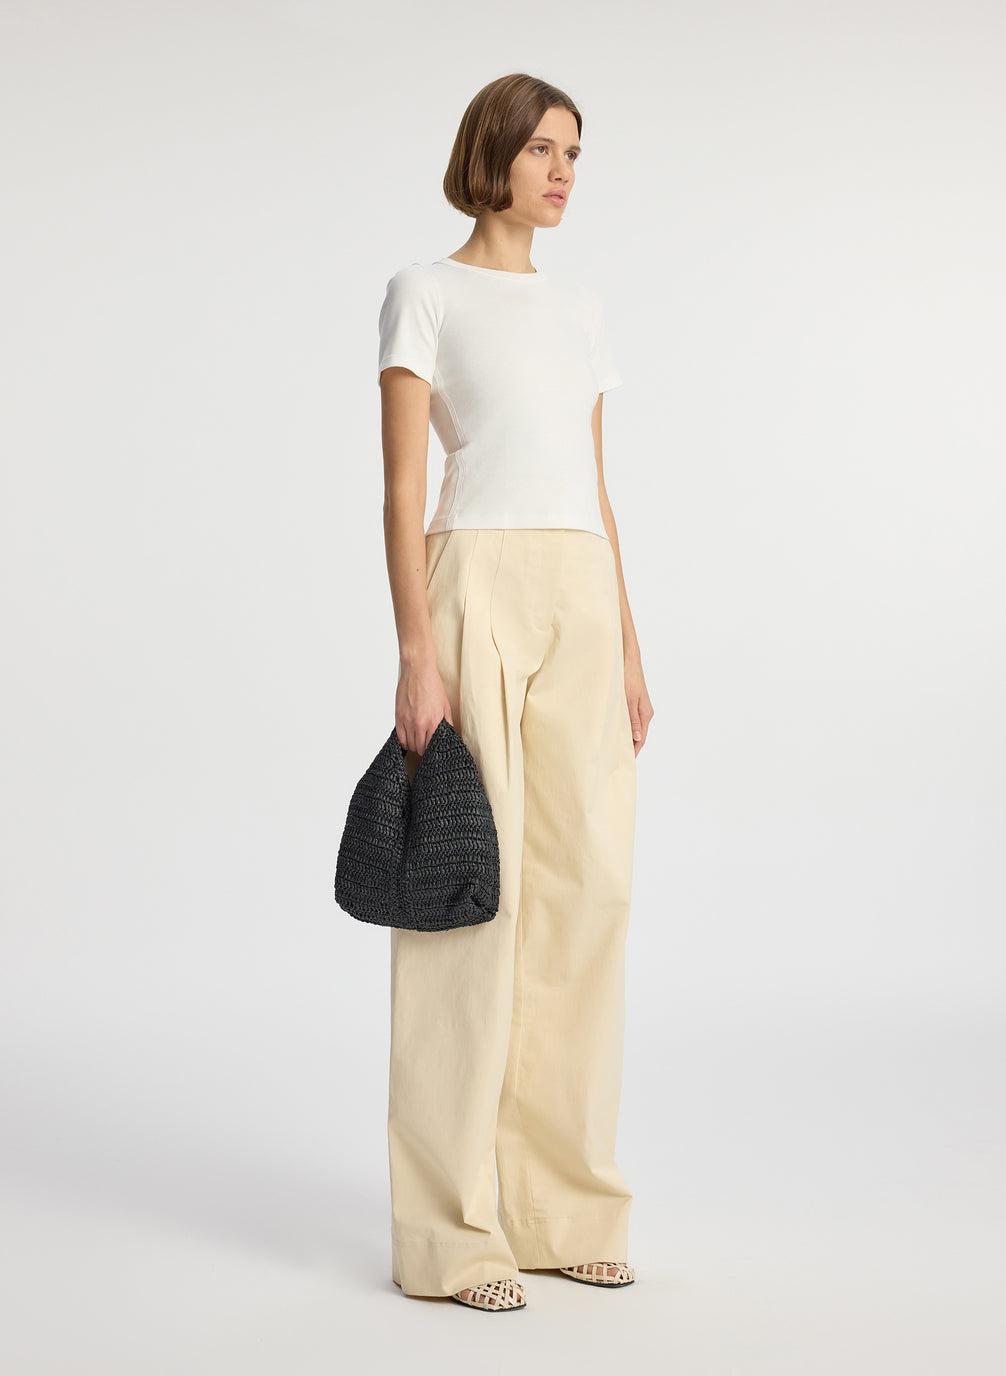 side view of woman in white tee and beige wide leg pants carrying small raffia woven handbag in black